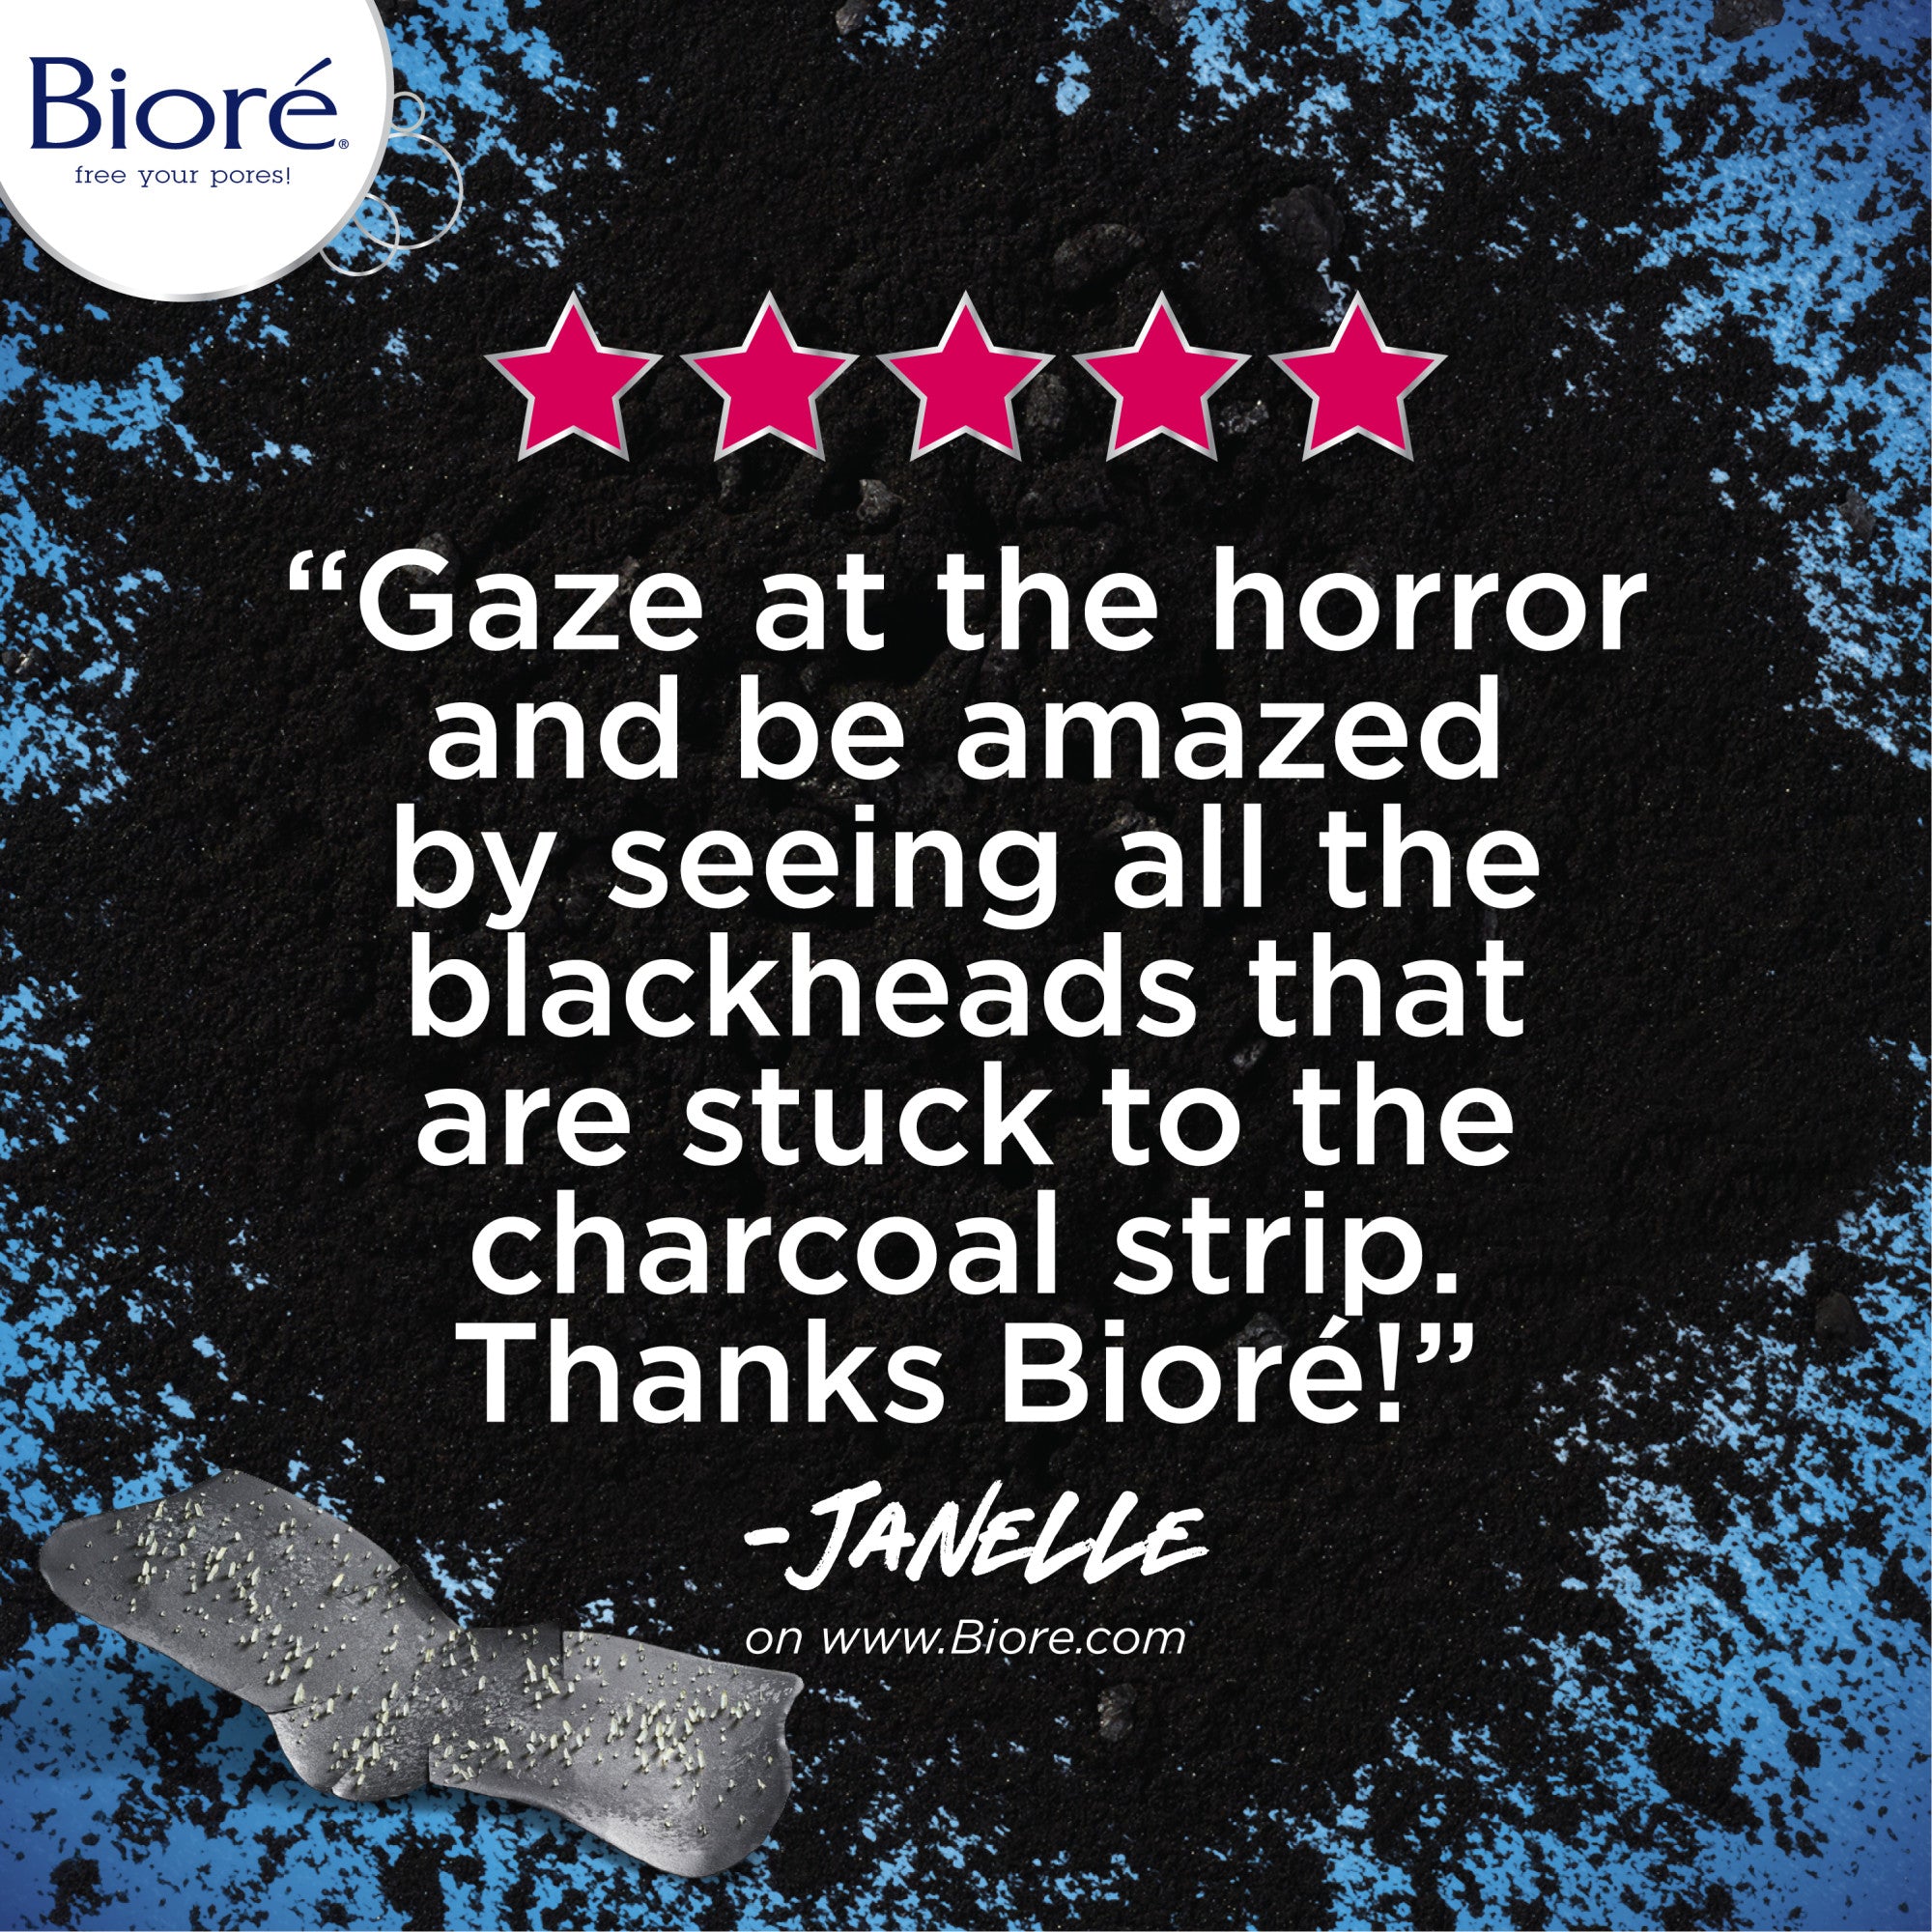 "Gaze at the horror and be amazed by seeing all the blackheads that are stuck to the charcoal strip. Thanks Biore!" - Janelle, testimonial on www.biore.com